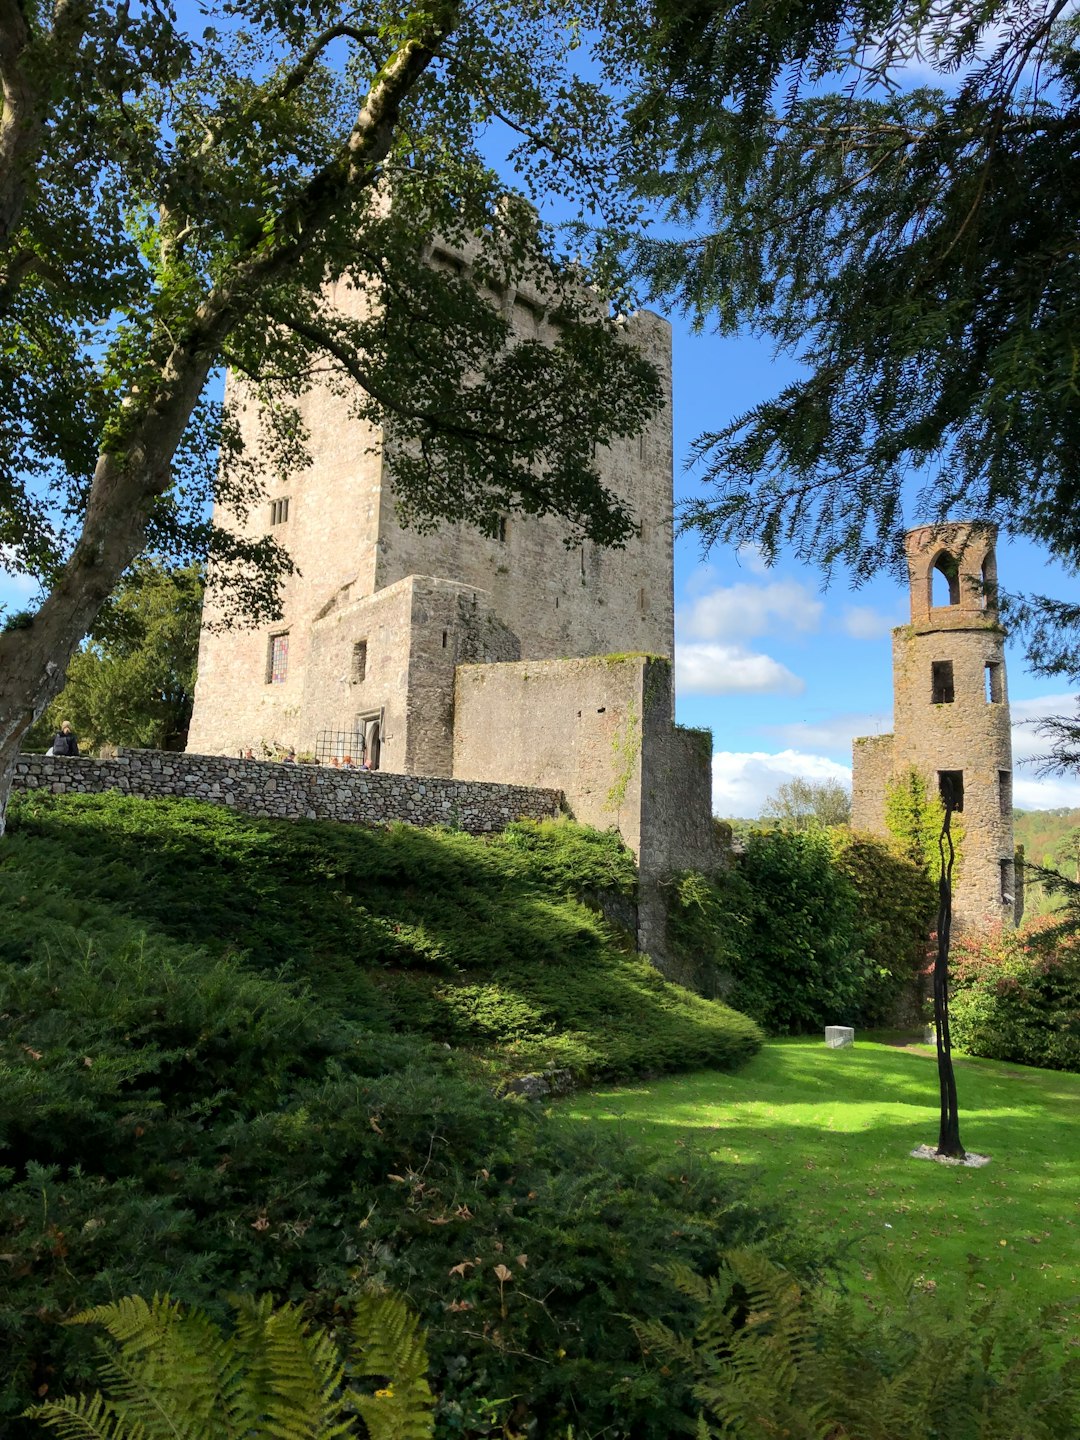 Travel Tips and Stories of Blarney Castle and Gardens in Ireland